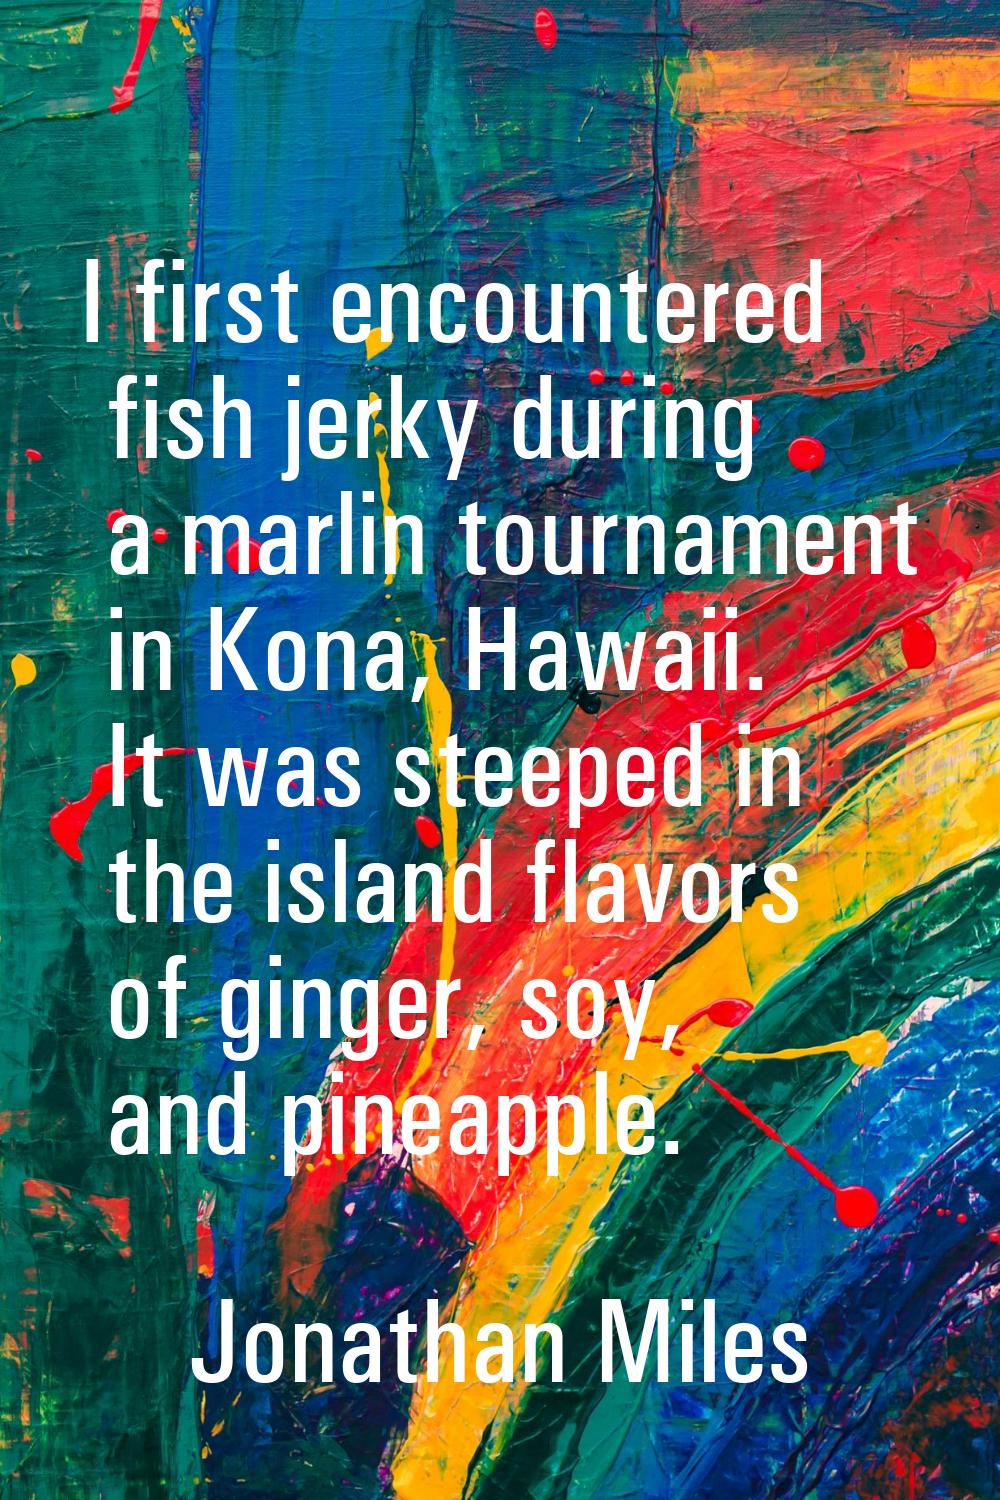 I first encountered fish jerky during a marlin tournament in Kona, Hawaii. It was steeped in the is